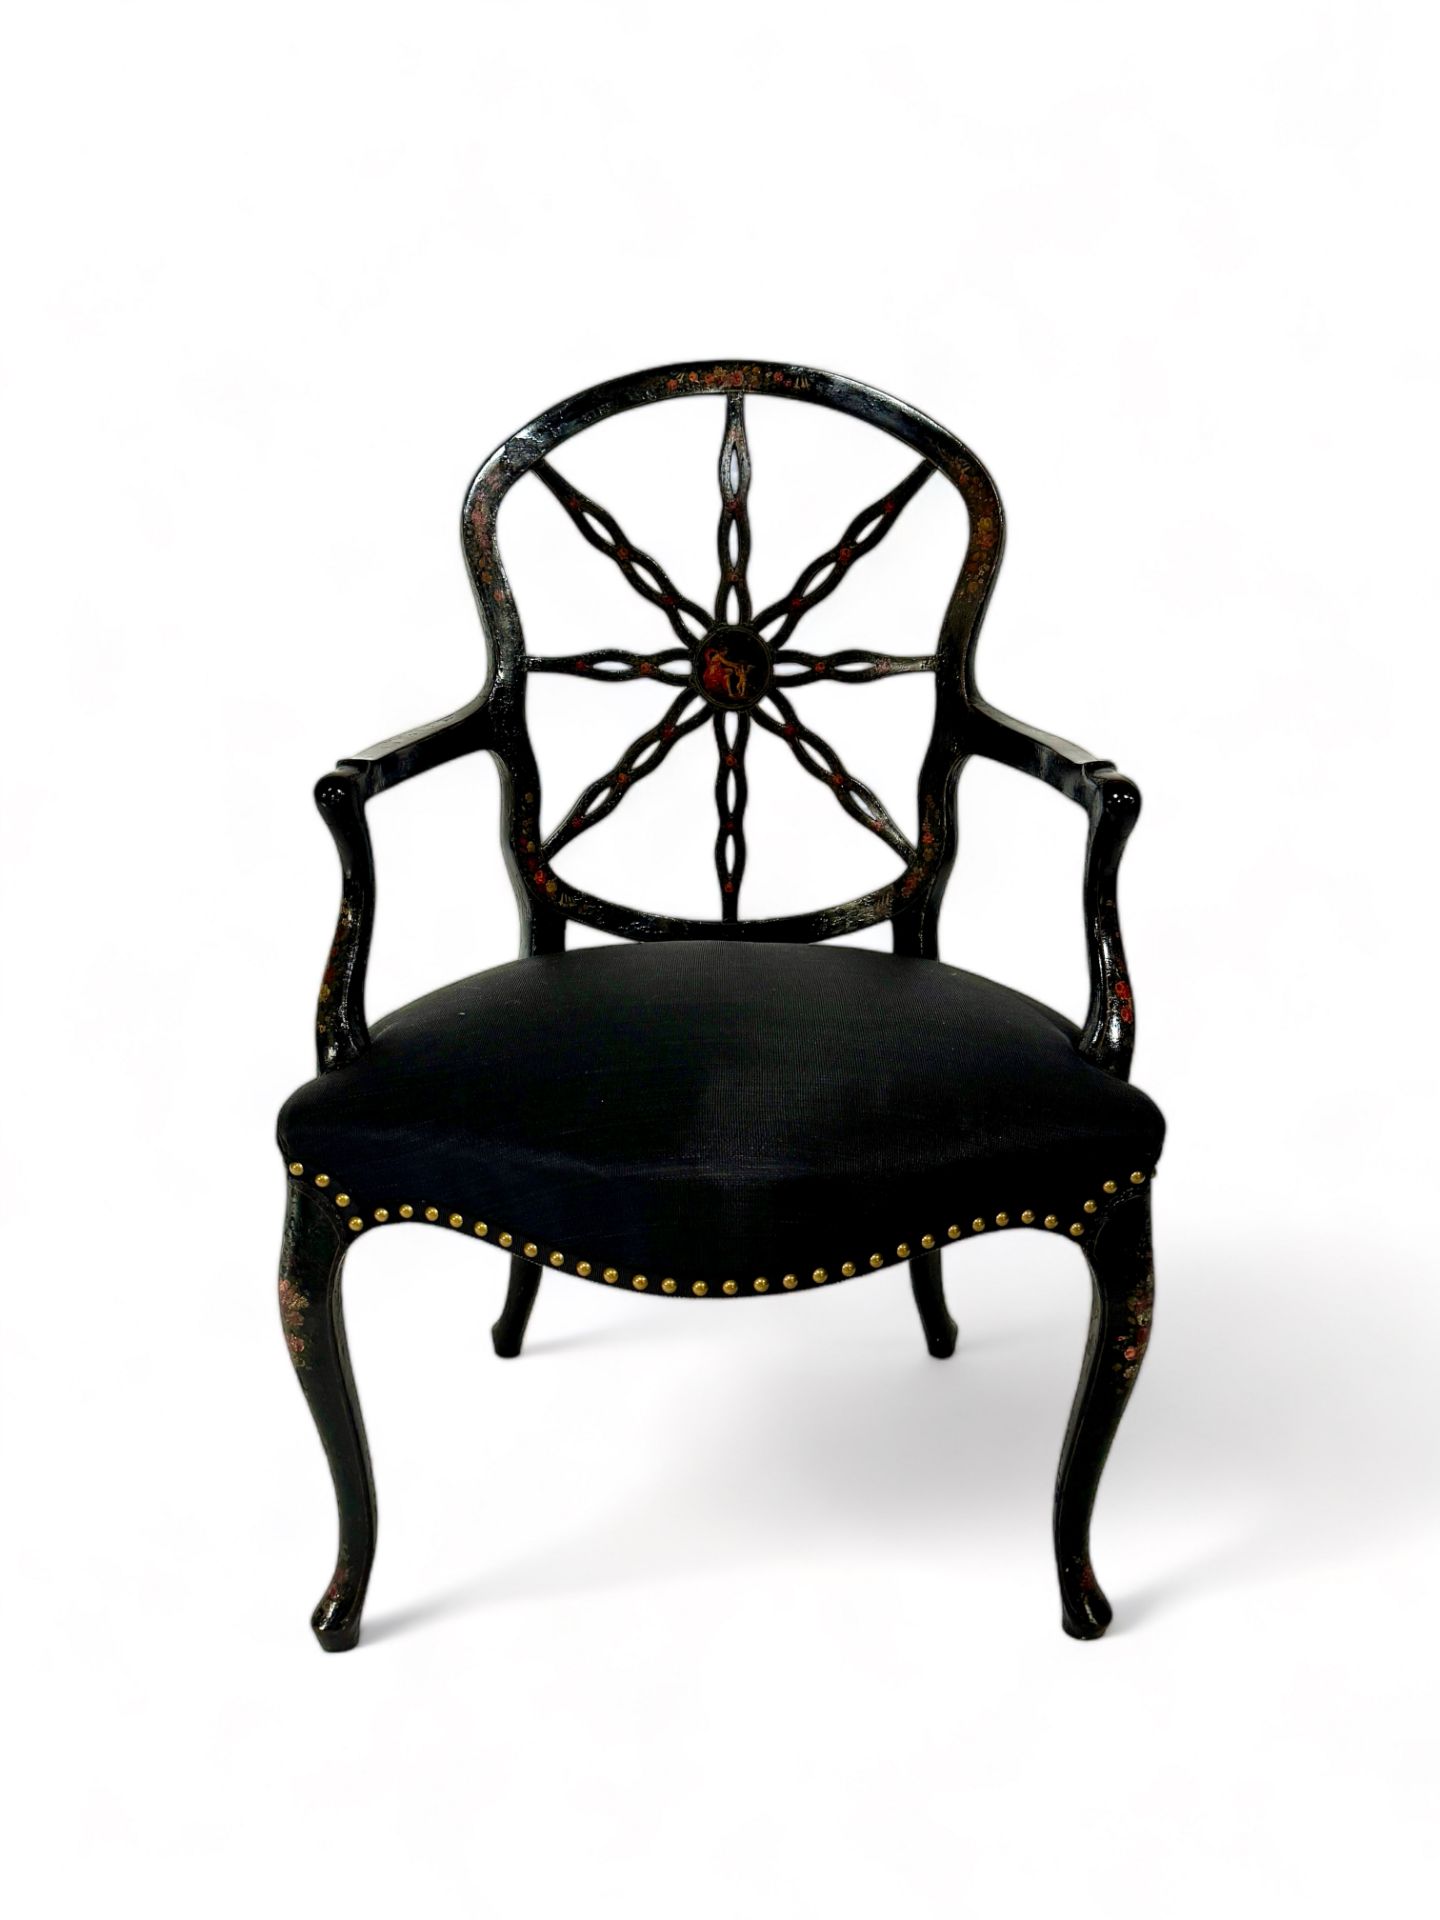 A George III black japanned and polychrome decorated open armchair